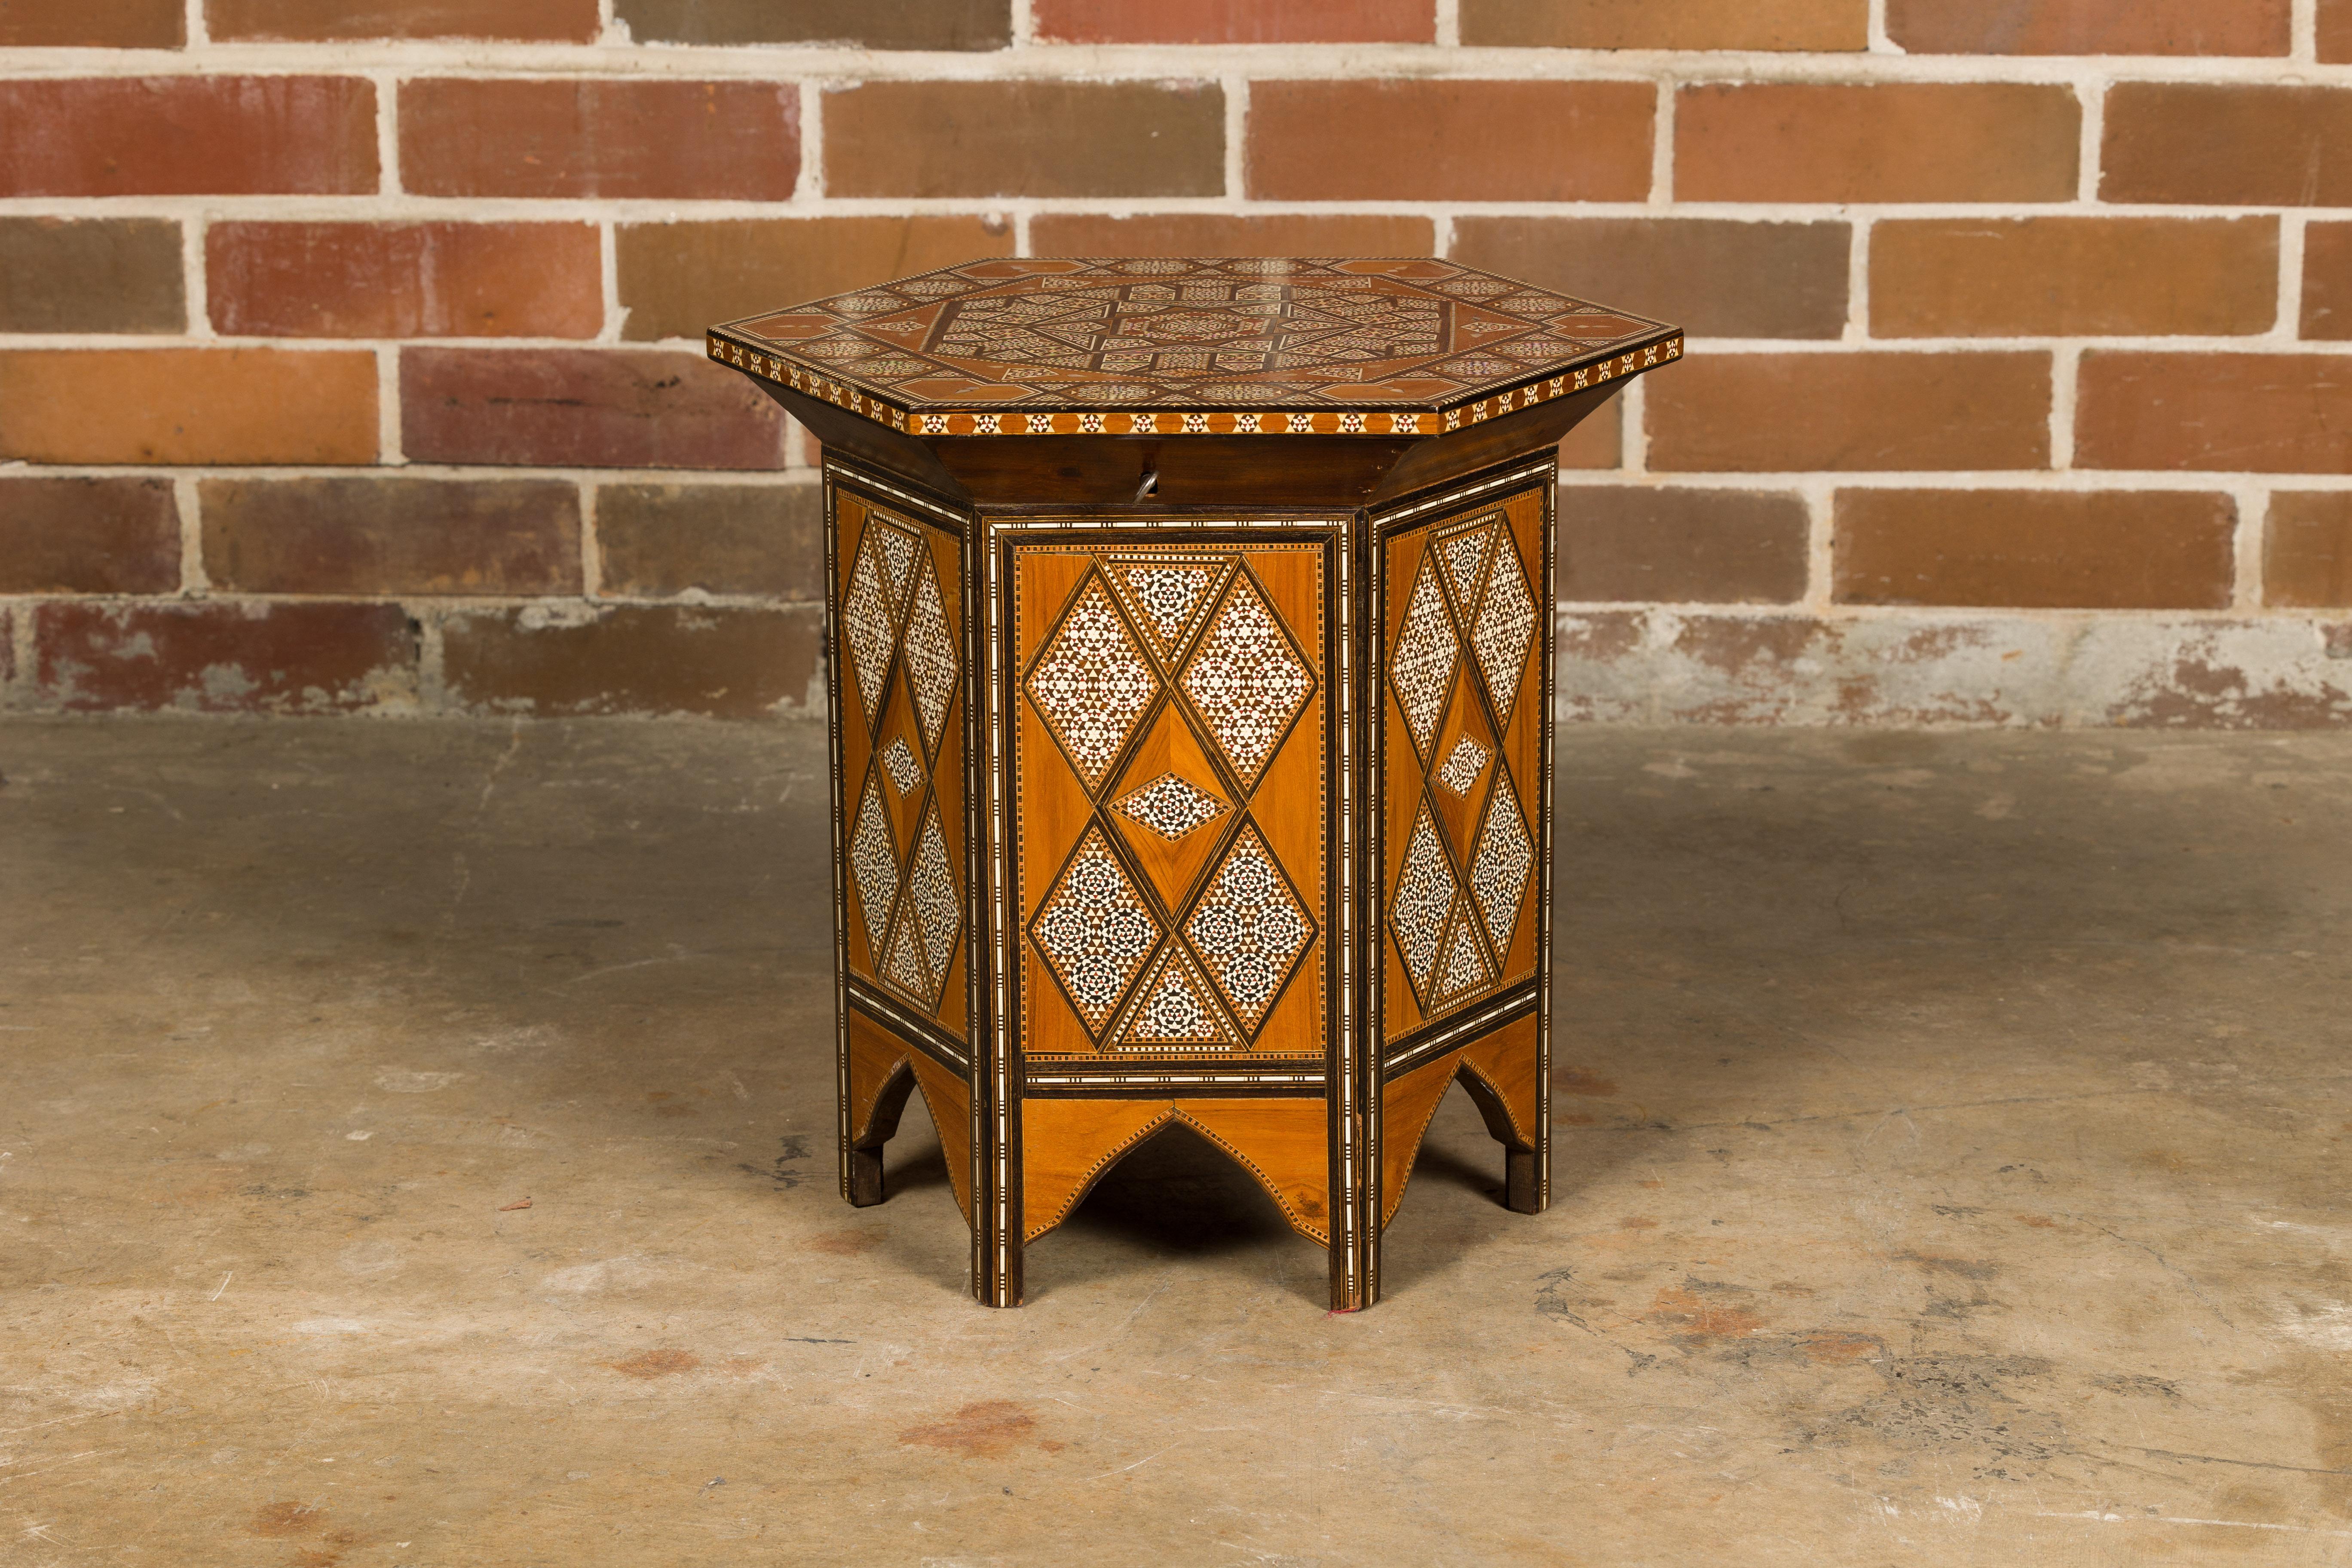 A Moorish style Moroccan drinks table from circa 1920 with abundant geometric bone inlay and lift top. This exquisite Moorish-style Moroccan drinks table from circa 1920 is a true masterpiece of design and craftsmanship. The table's surface and